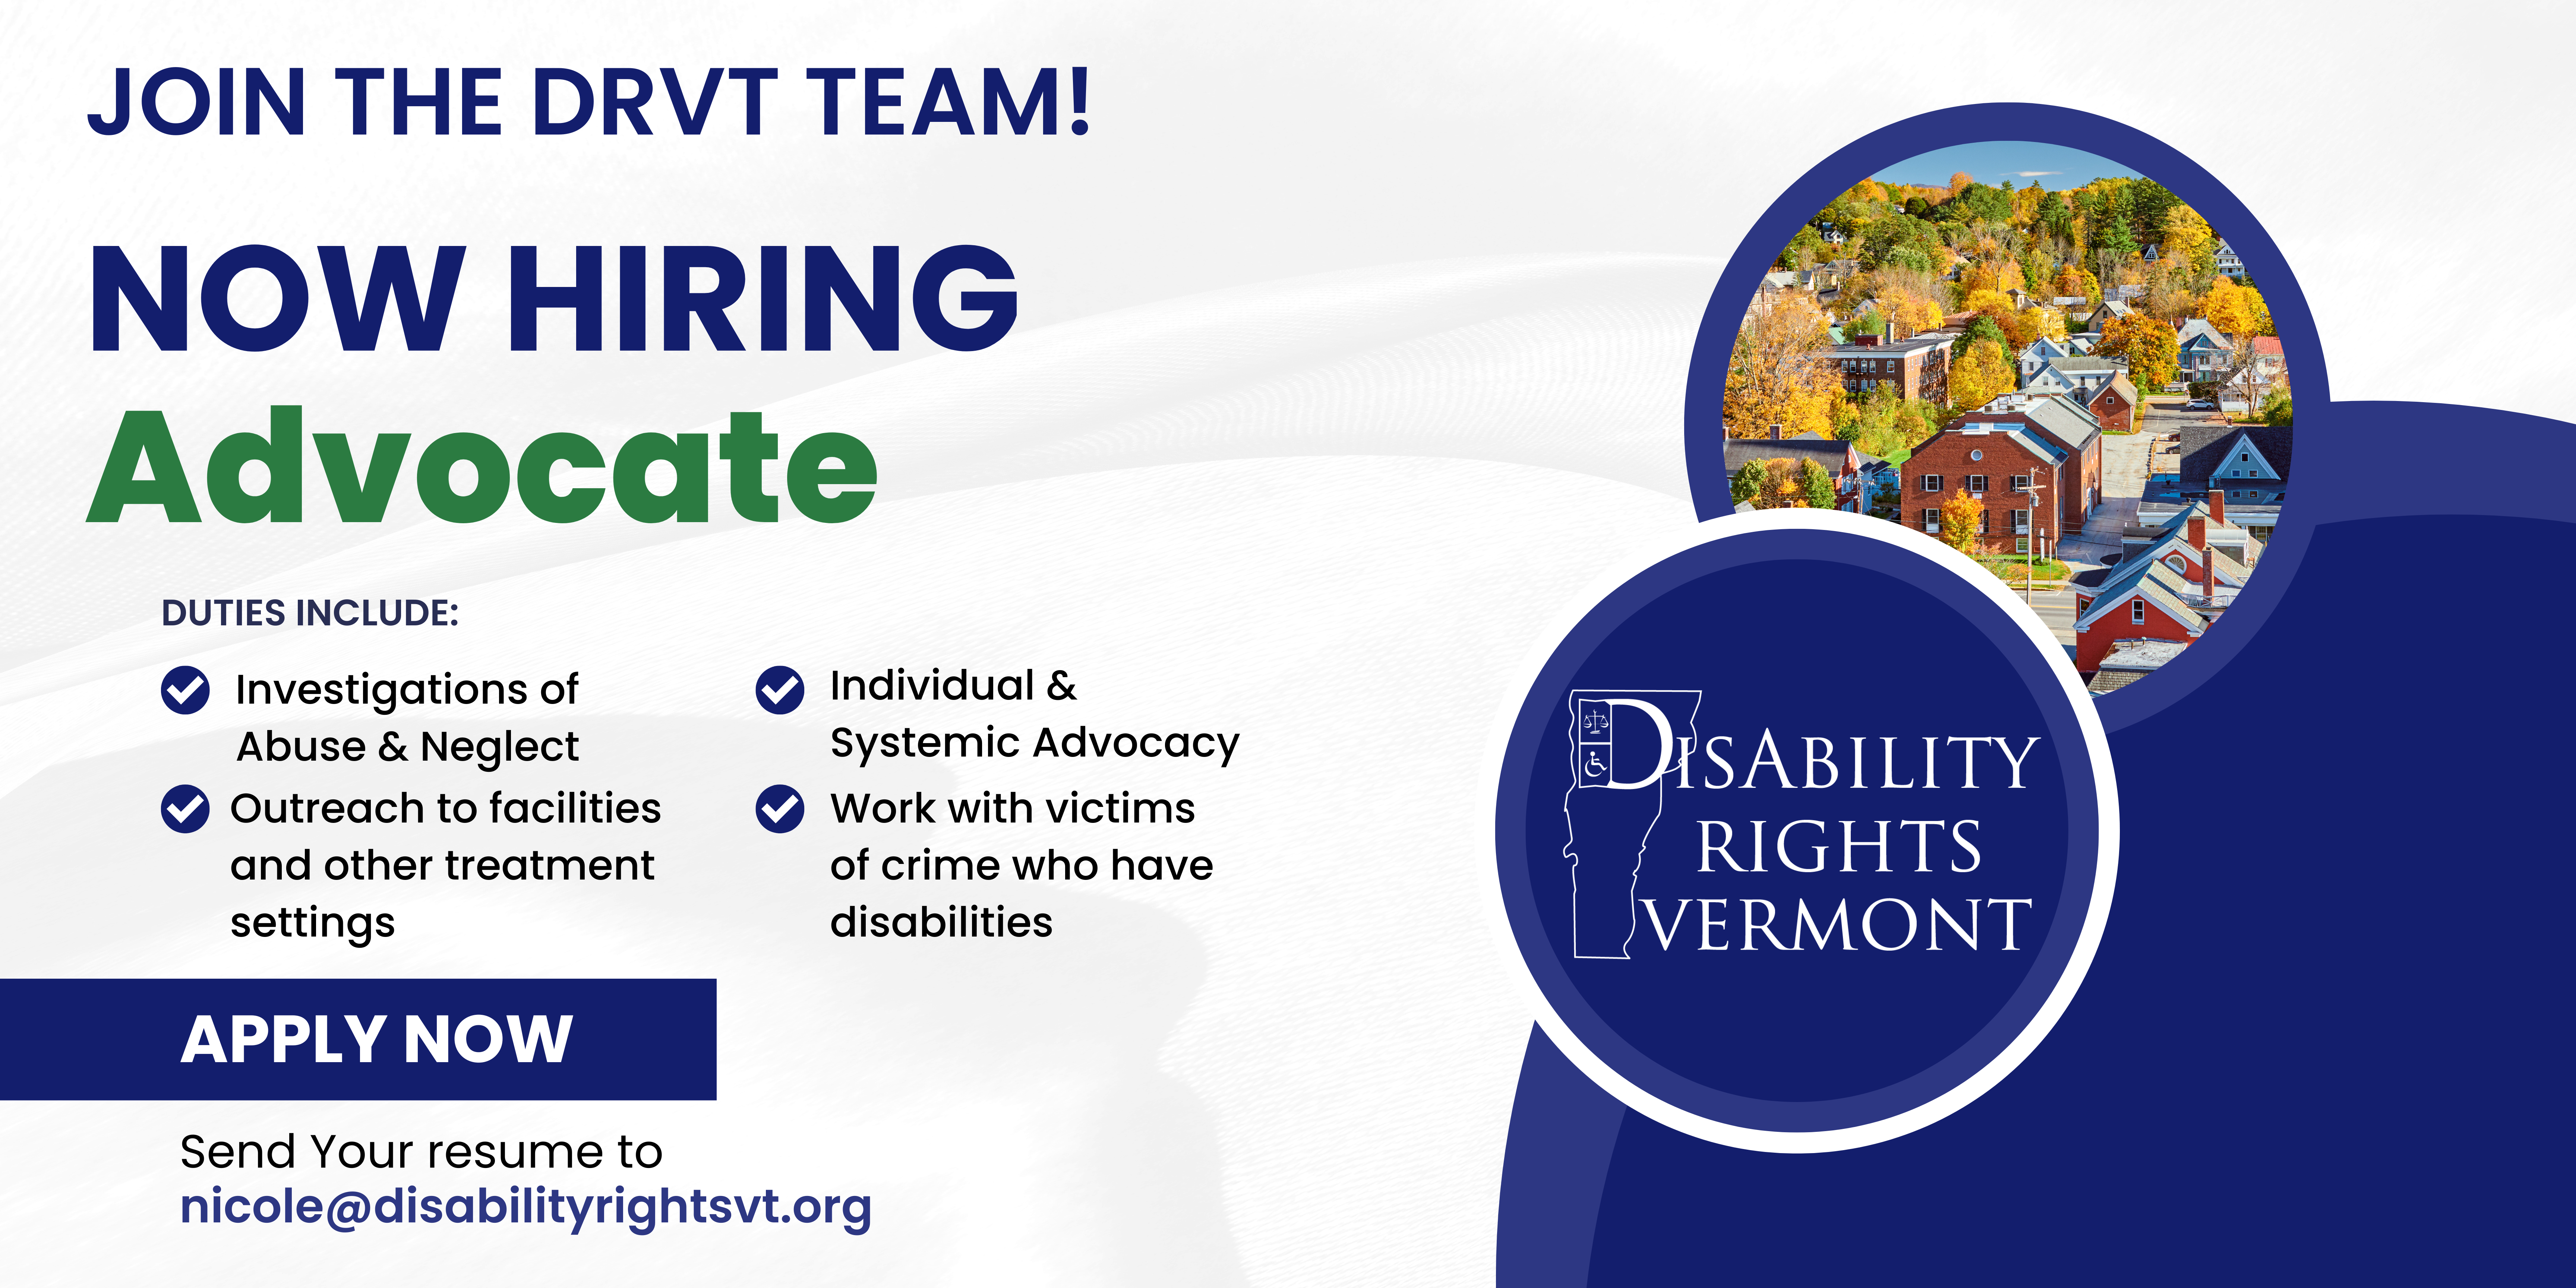 "Join the DRVT team! Now Hiring: Advocate. Duties include: Investigations of Abuse & Neglect, Outreach to facilities and other treatment settings, individual systemic advocacy, work with victims of crime who have disabilities. Apply Now send your resume to nicole@disabilityrightsvt.org